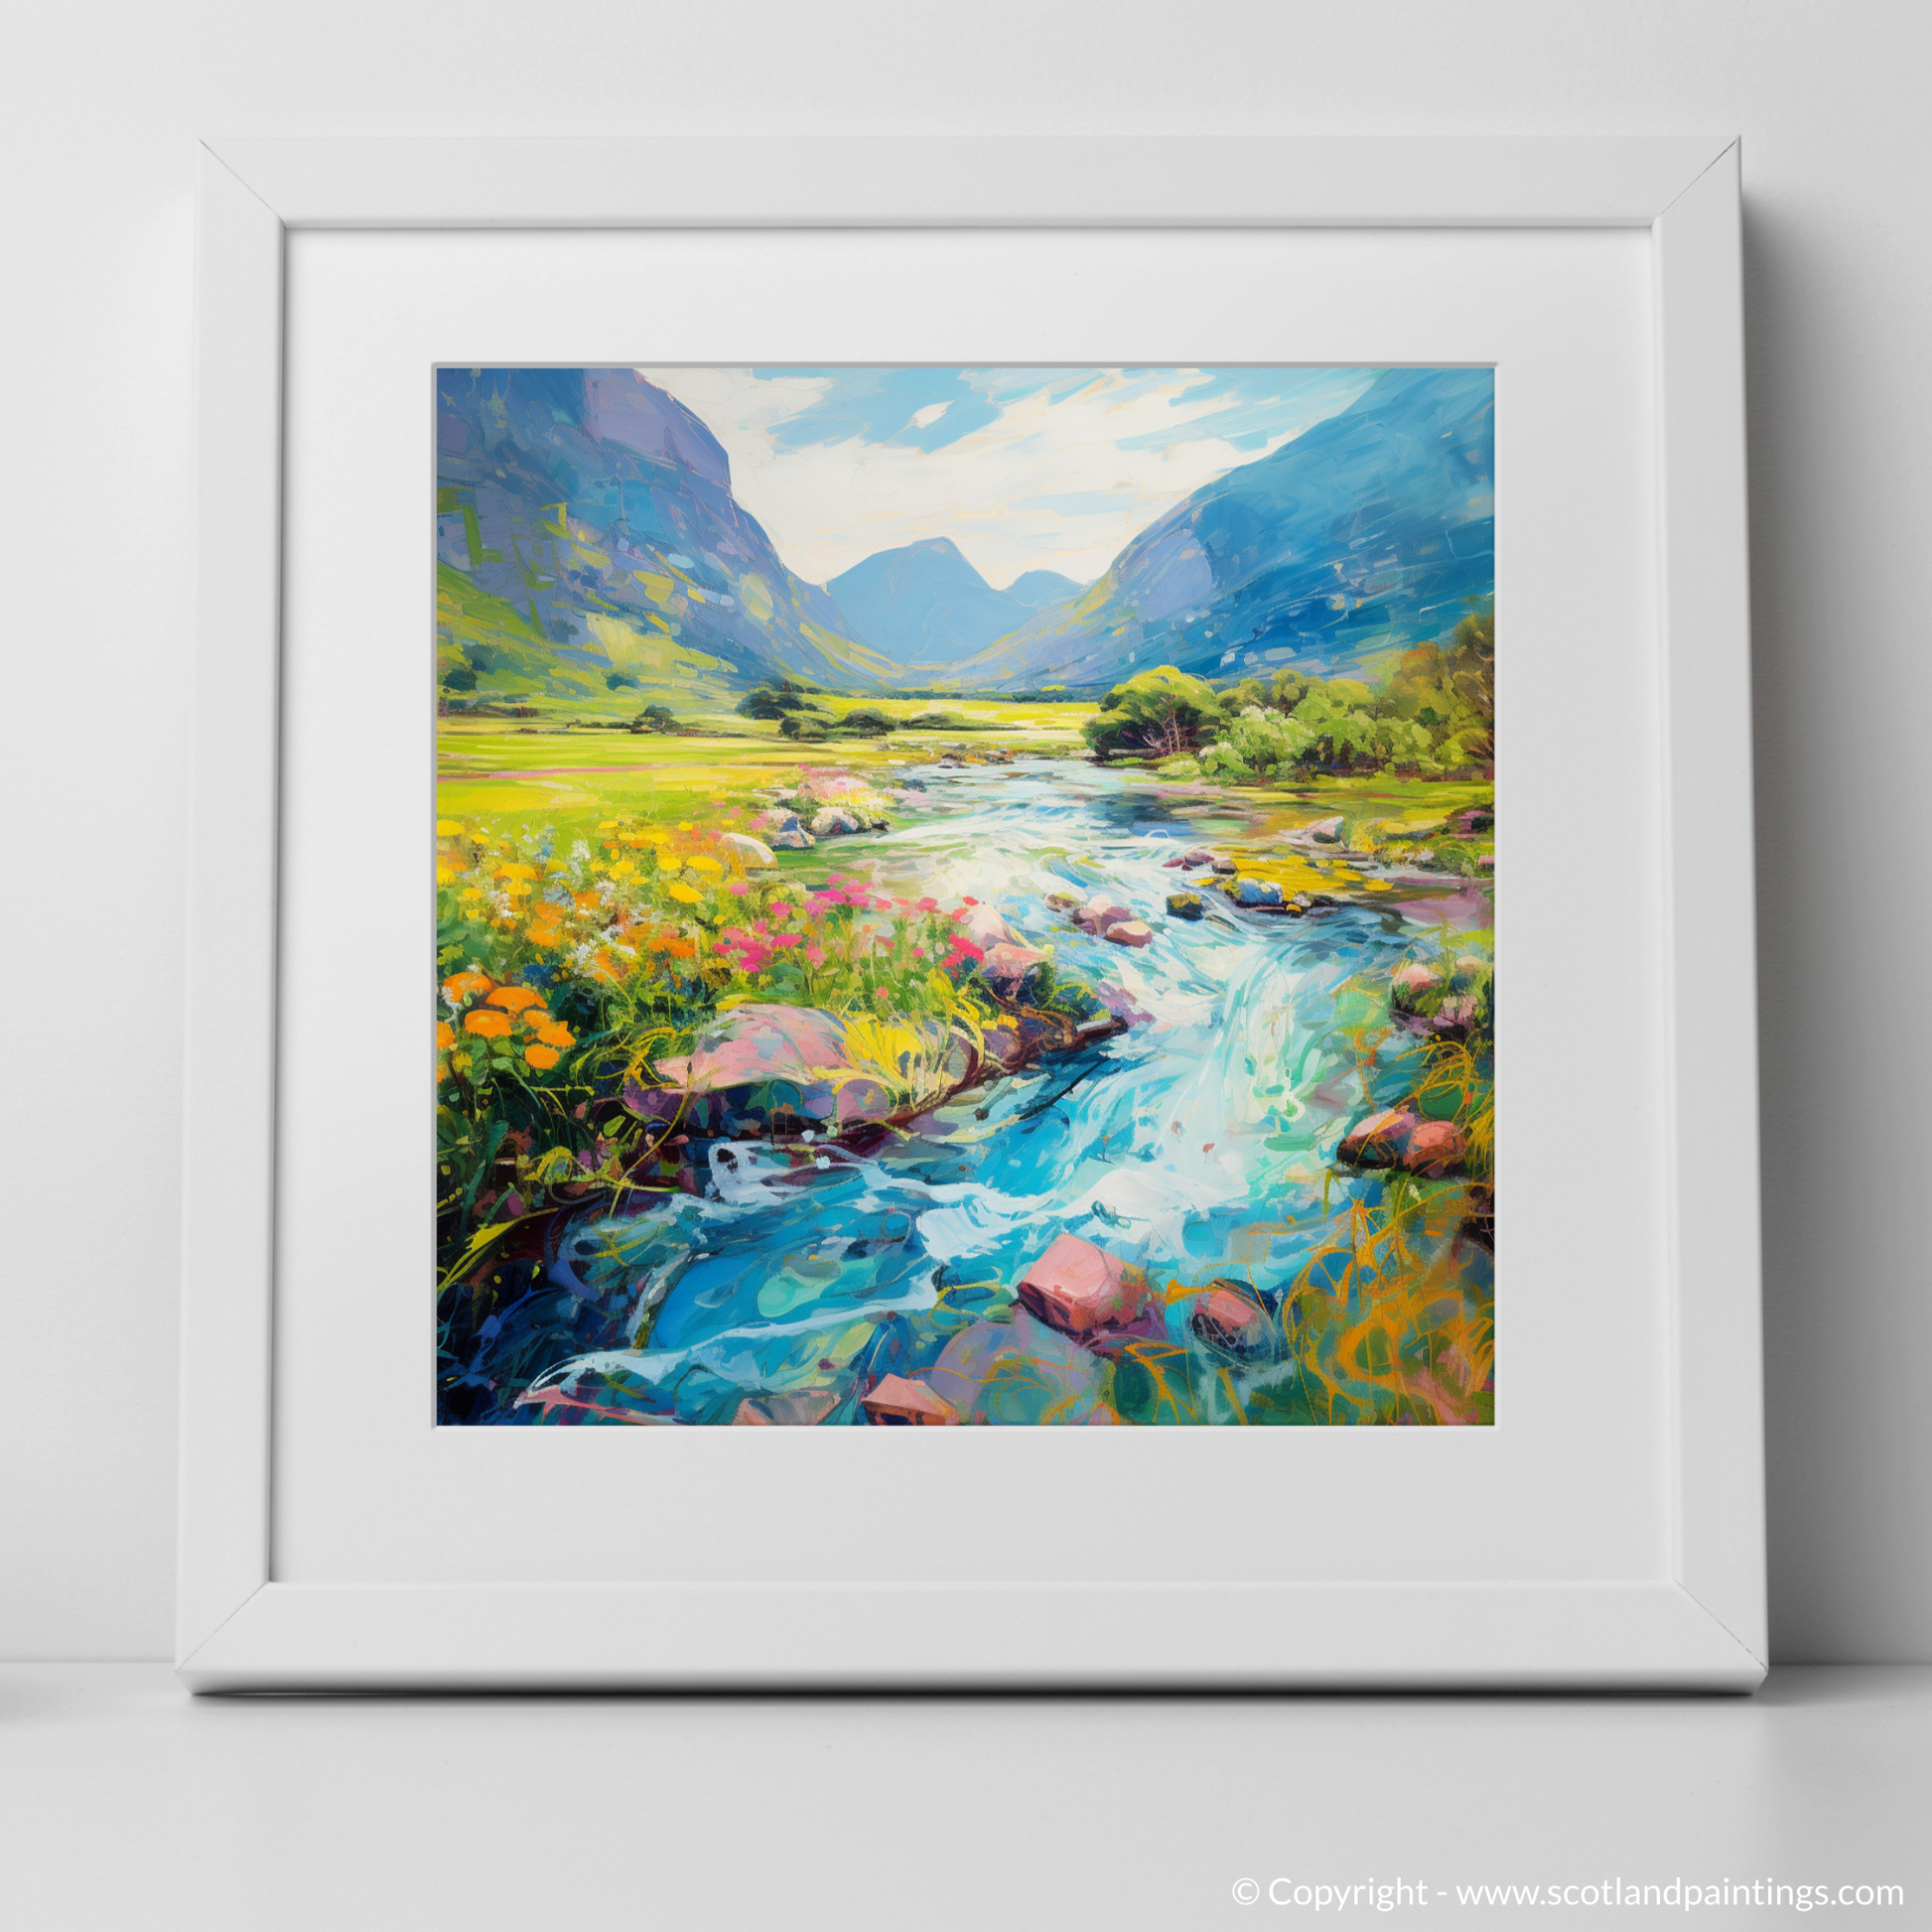 Art Print of River in Glencoe during summer with a white frame